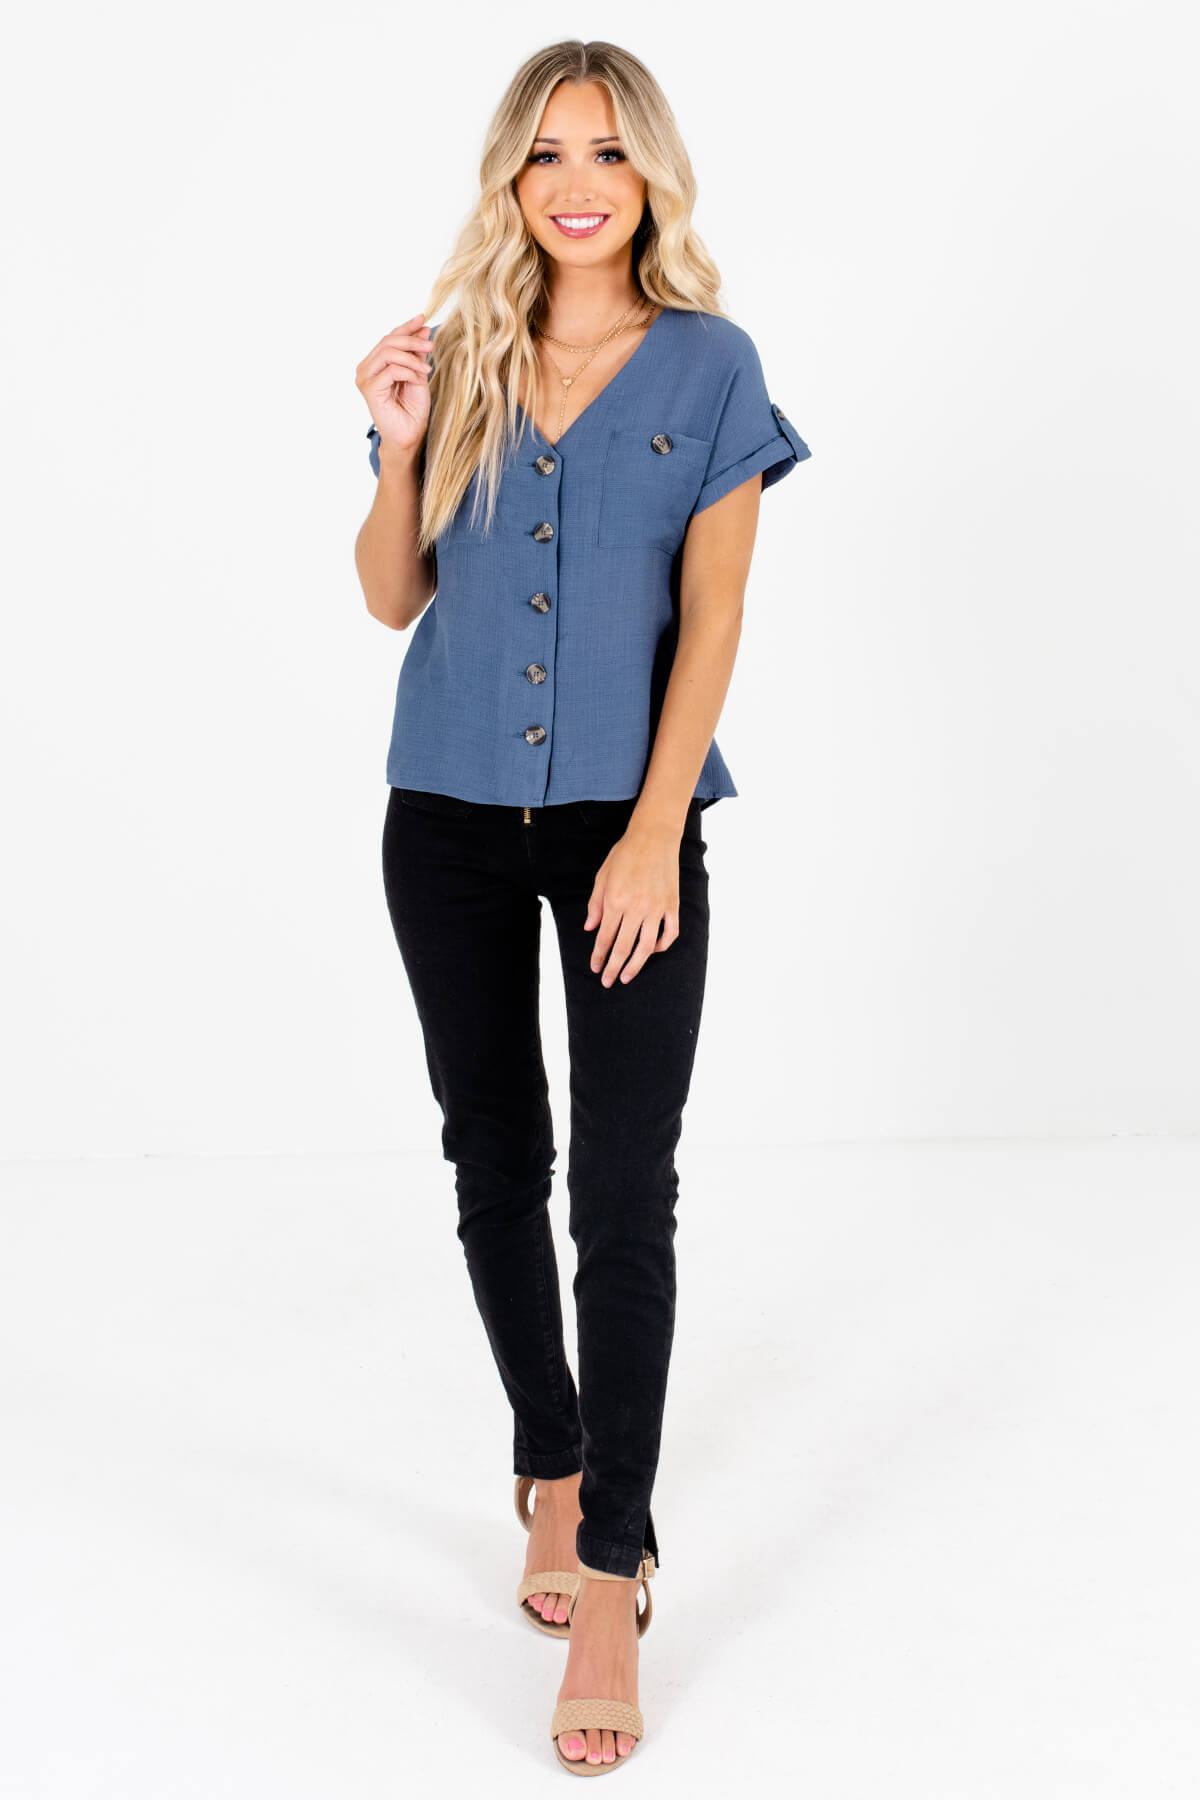 Women’s Slate Blue Fall and Winter Boutique Tops